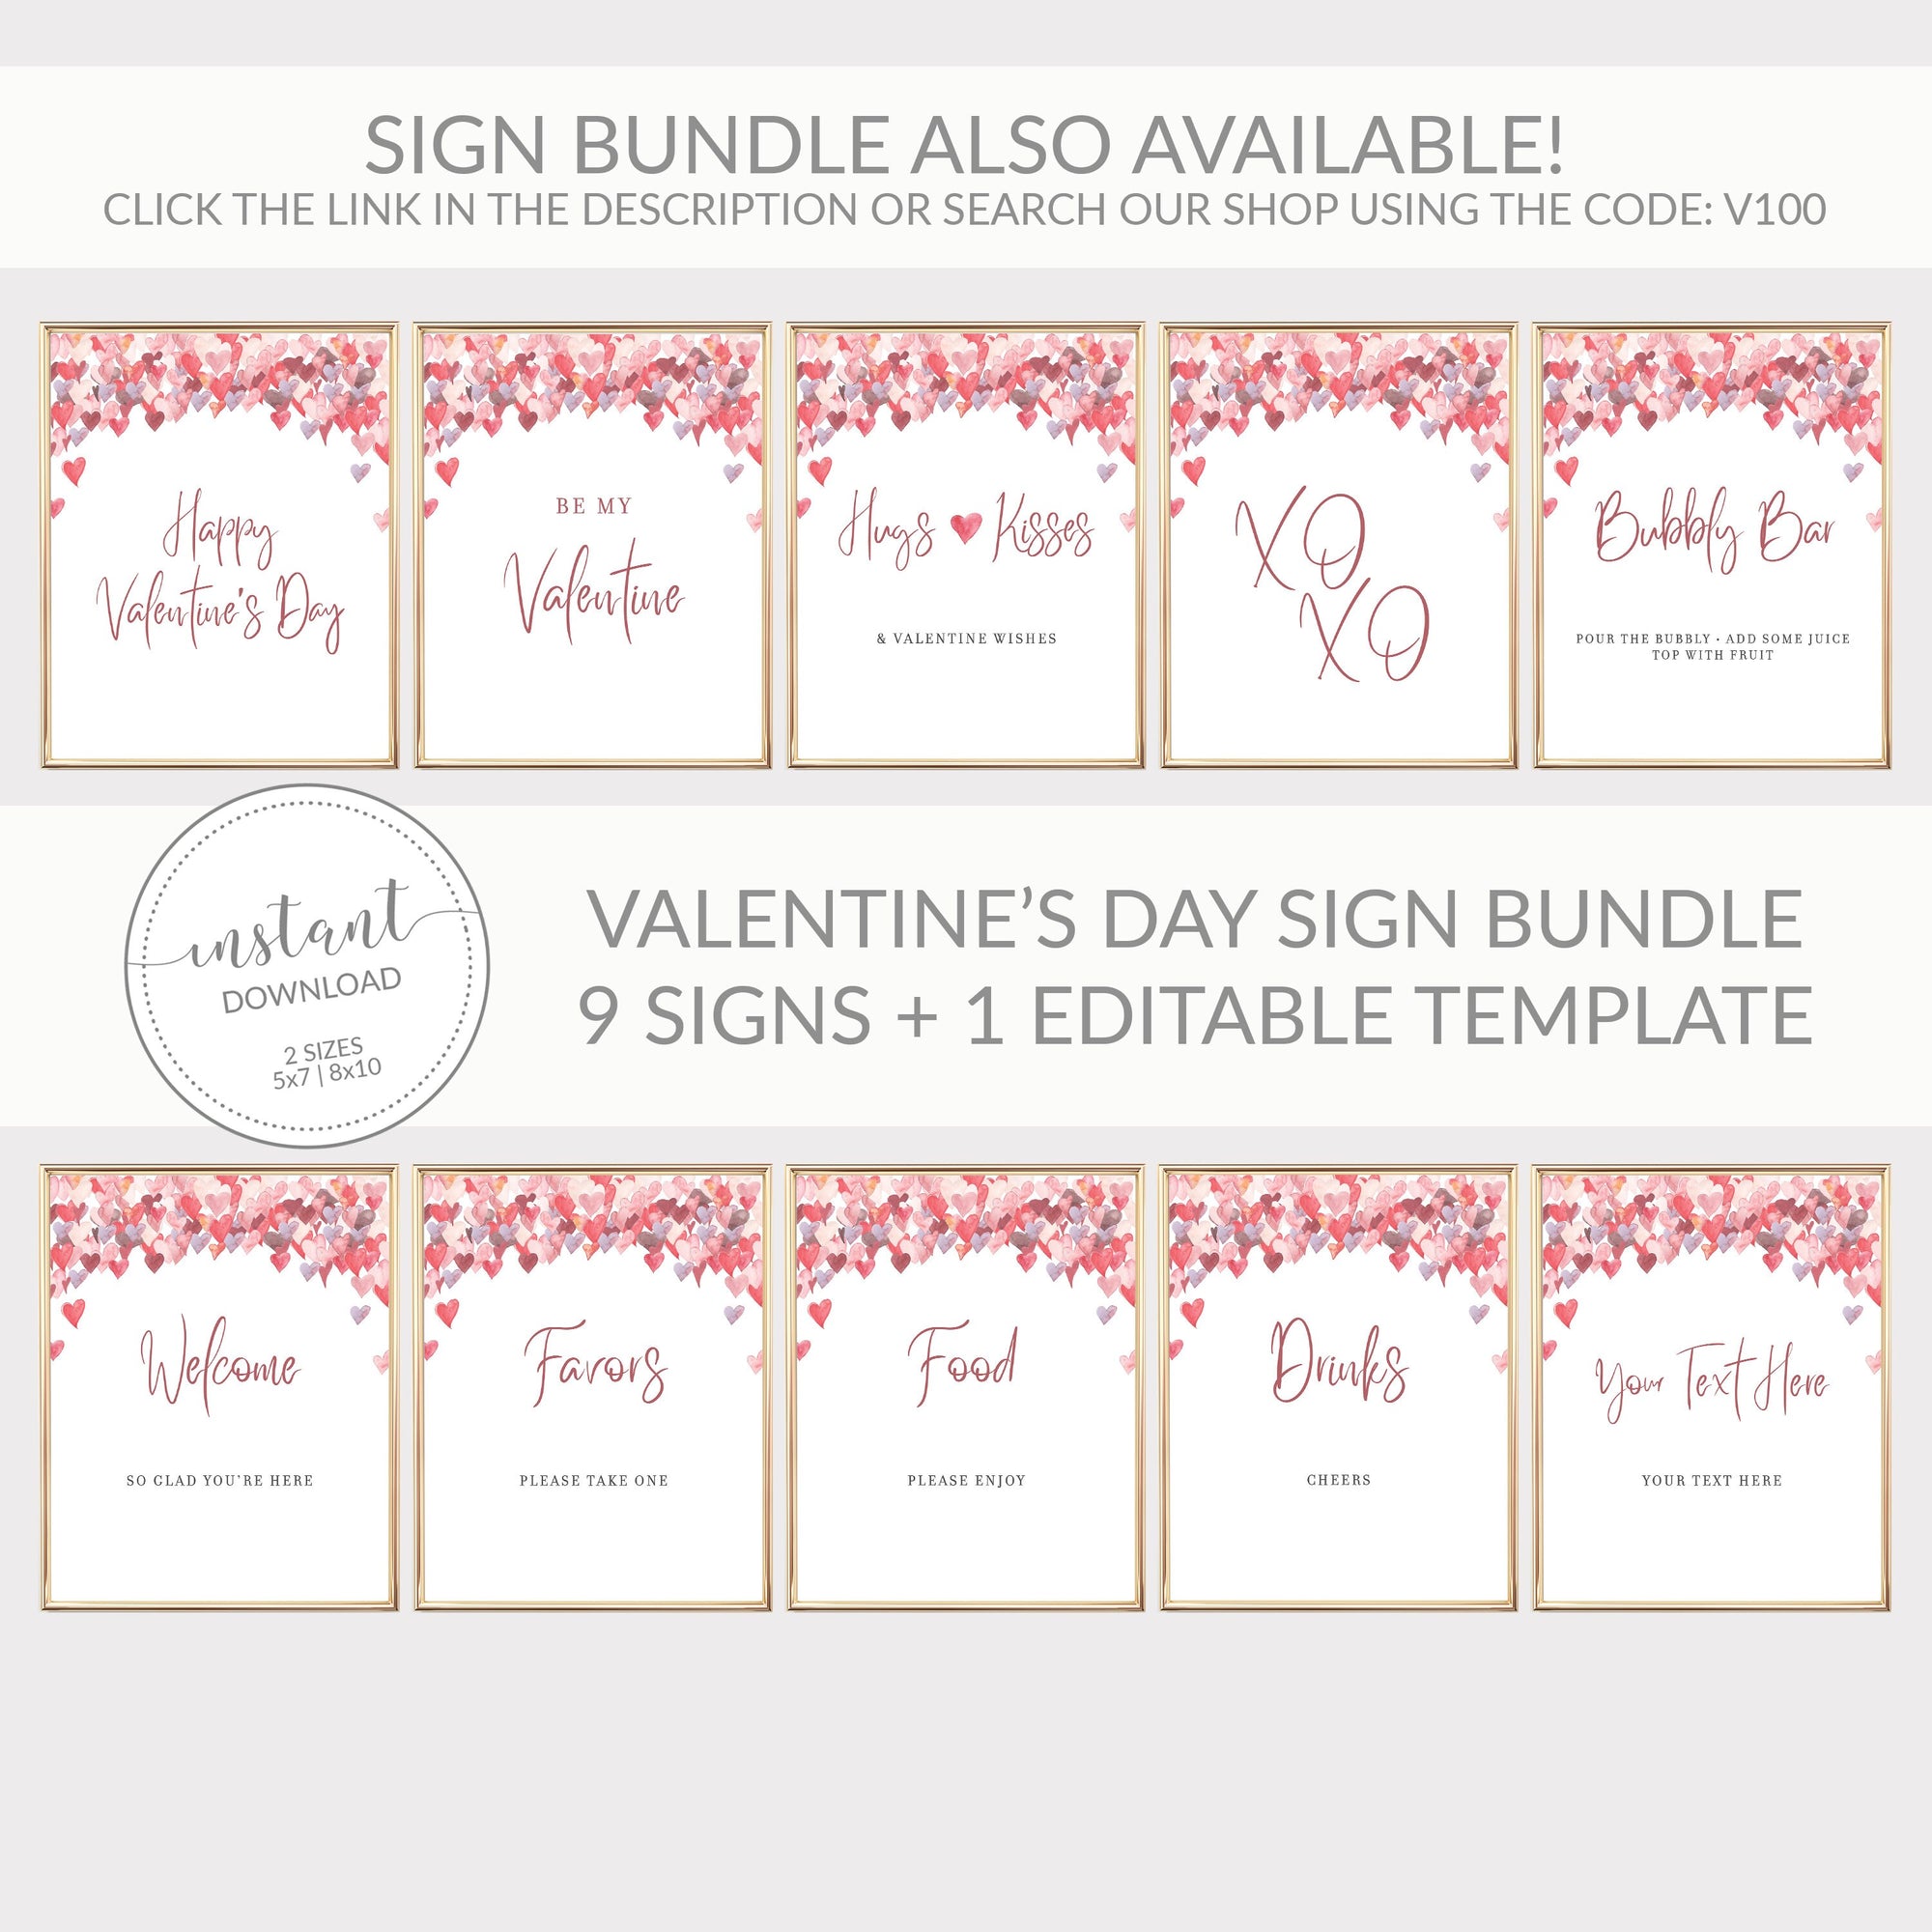 Happy Valentines Day Sign Printable, Valentines Day Decor, Valentines Day Party Decorations, Valentines Party Sign, INSTANT DOWNLOAD - VH100